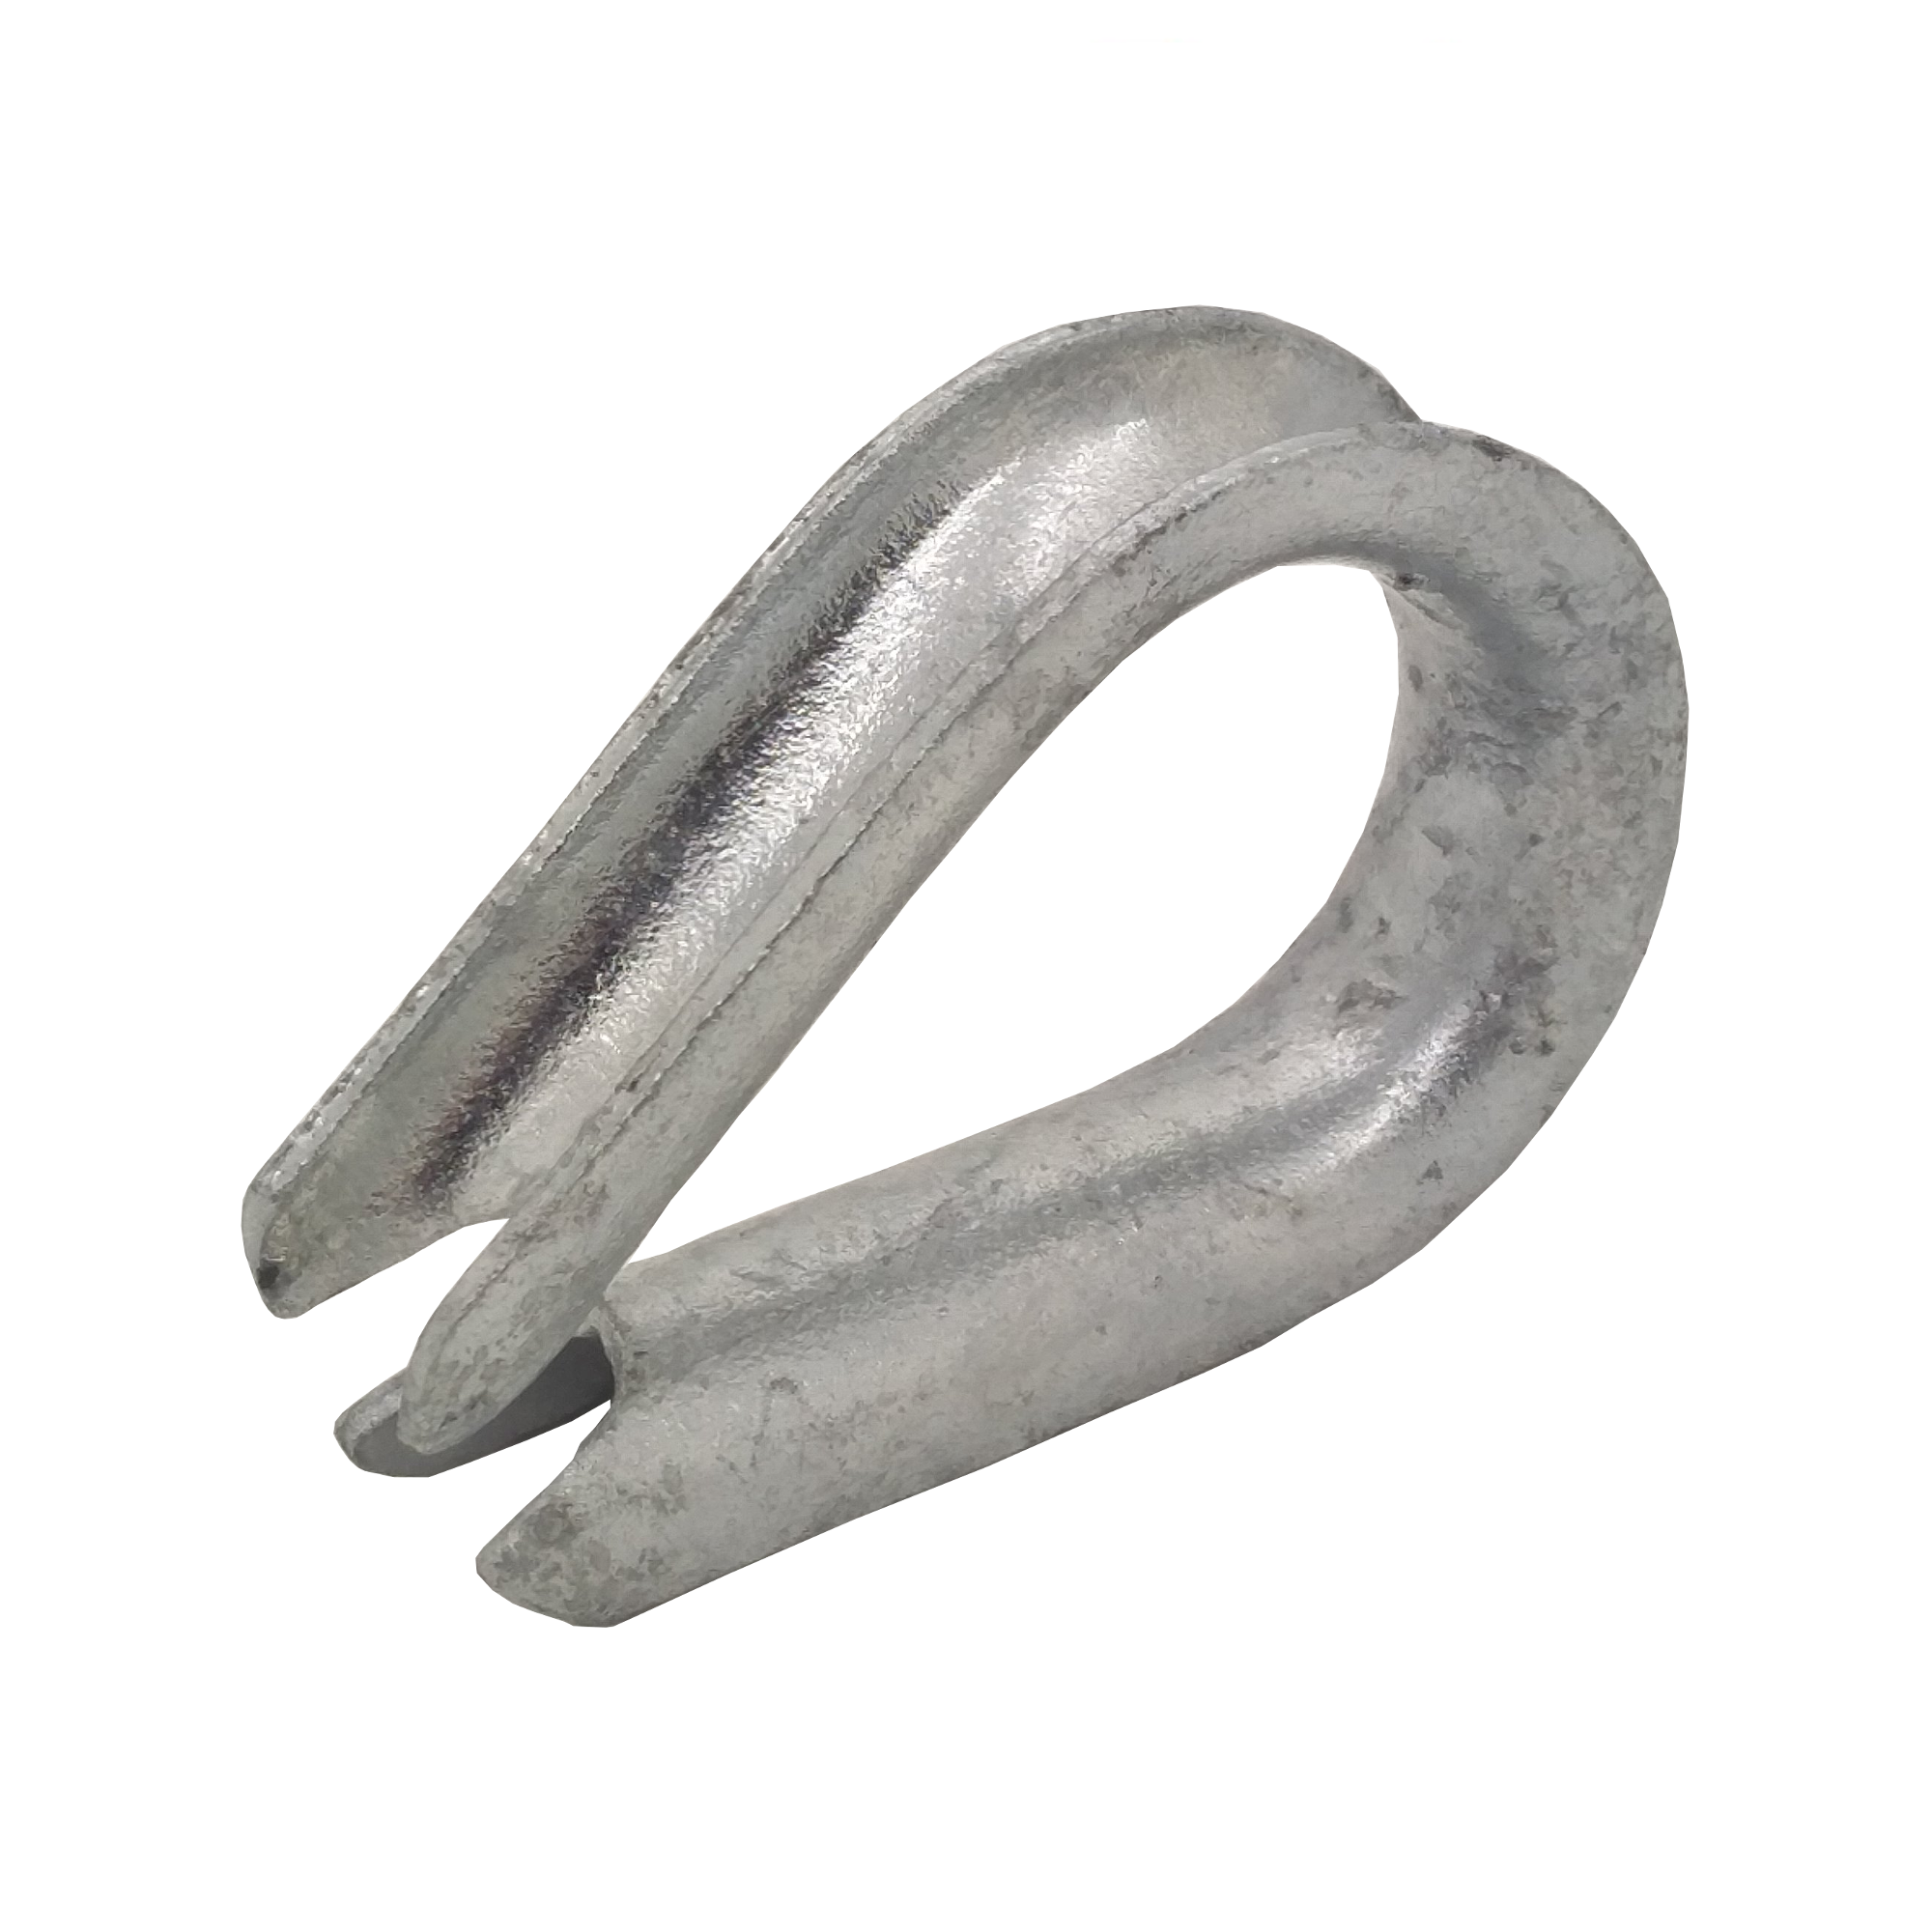 Crosby G-411 Galvanised Standard Wire Rope Thimble for 5mm (3/16") Wire Rope